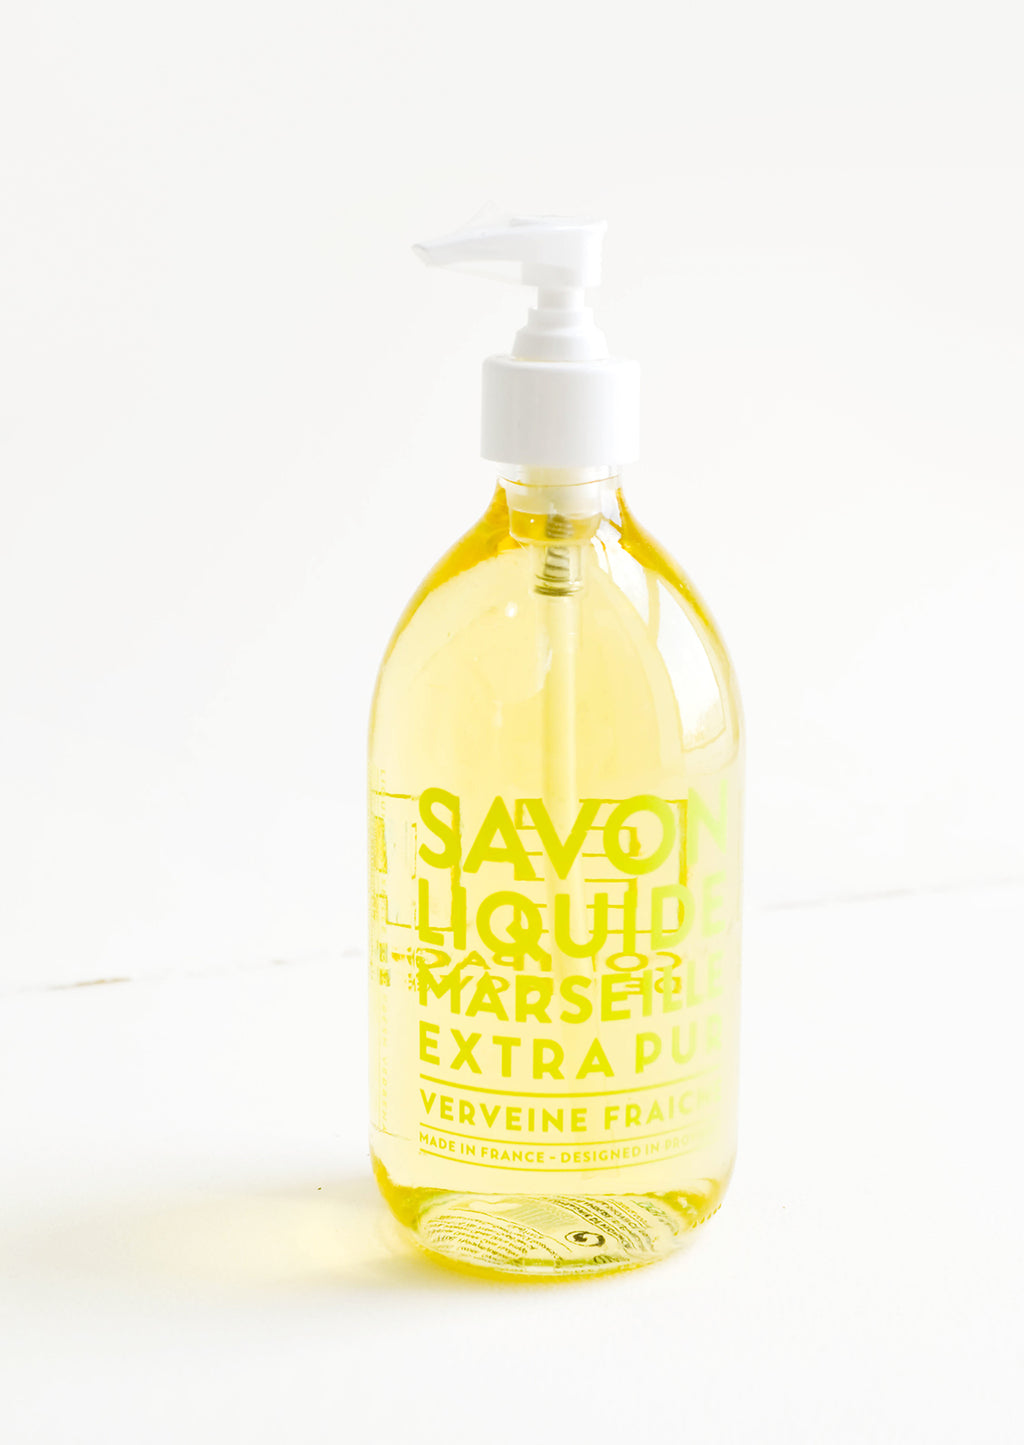 Verbena: A clear glass soap bottle with pale yellow interior liquid, lime green text, and a white plastic dispenser.